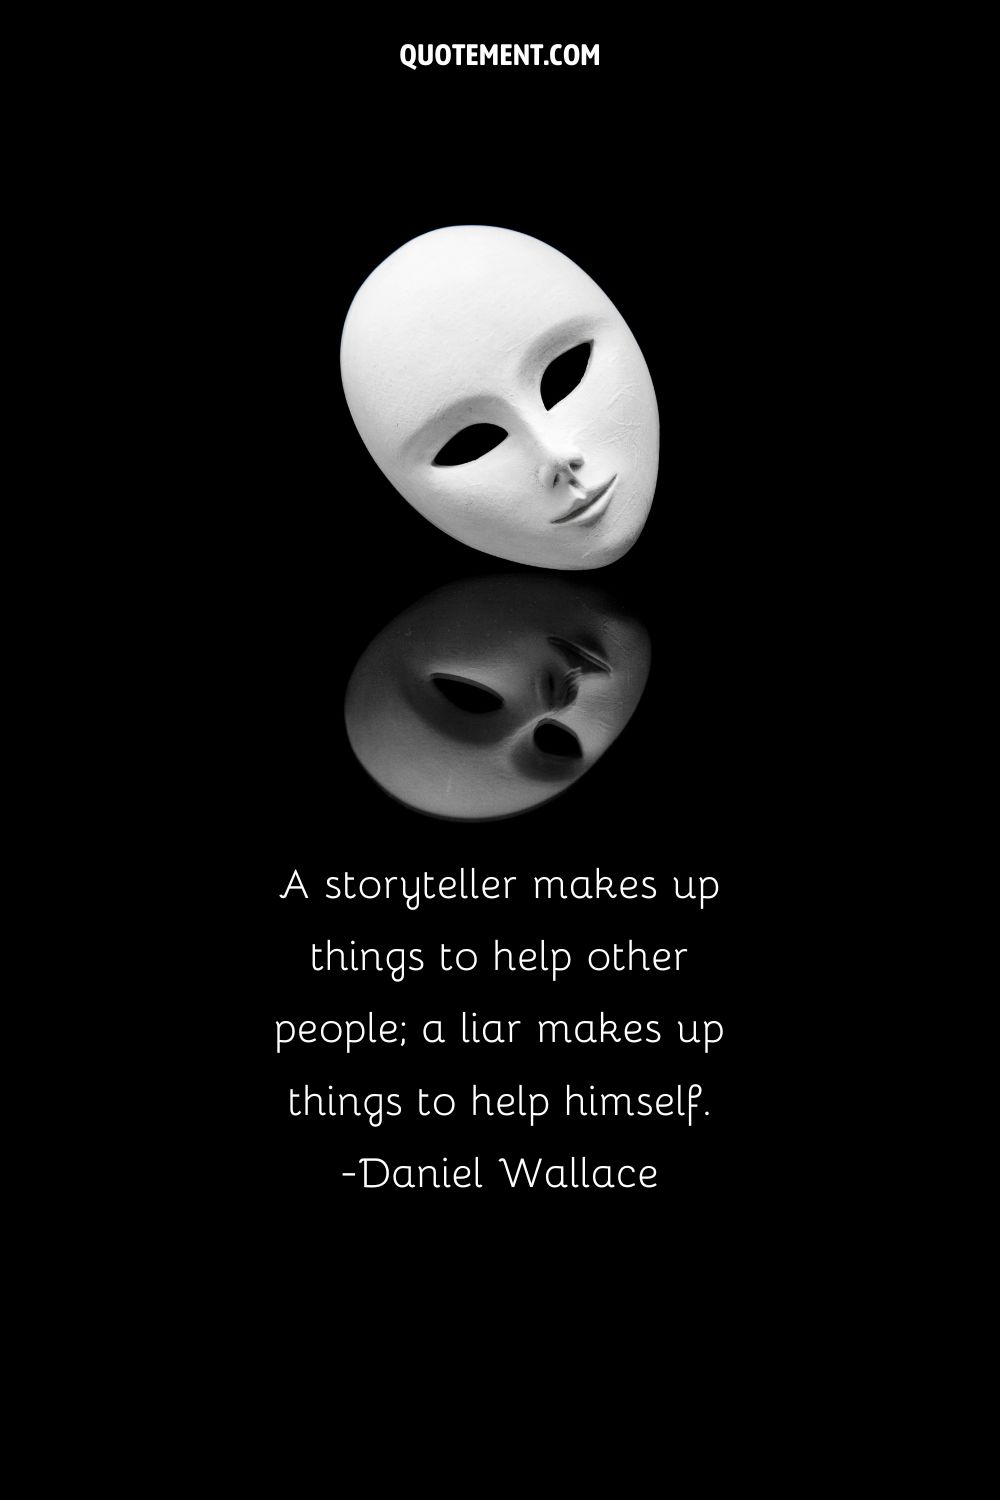 A storyteller makes up things to help other people; a liar makes up things to help himself